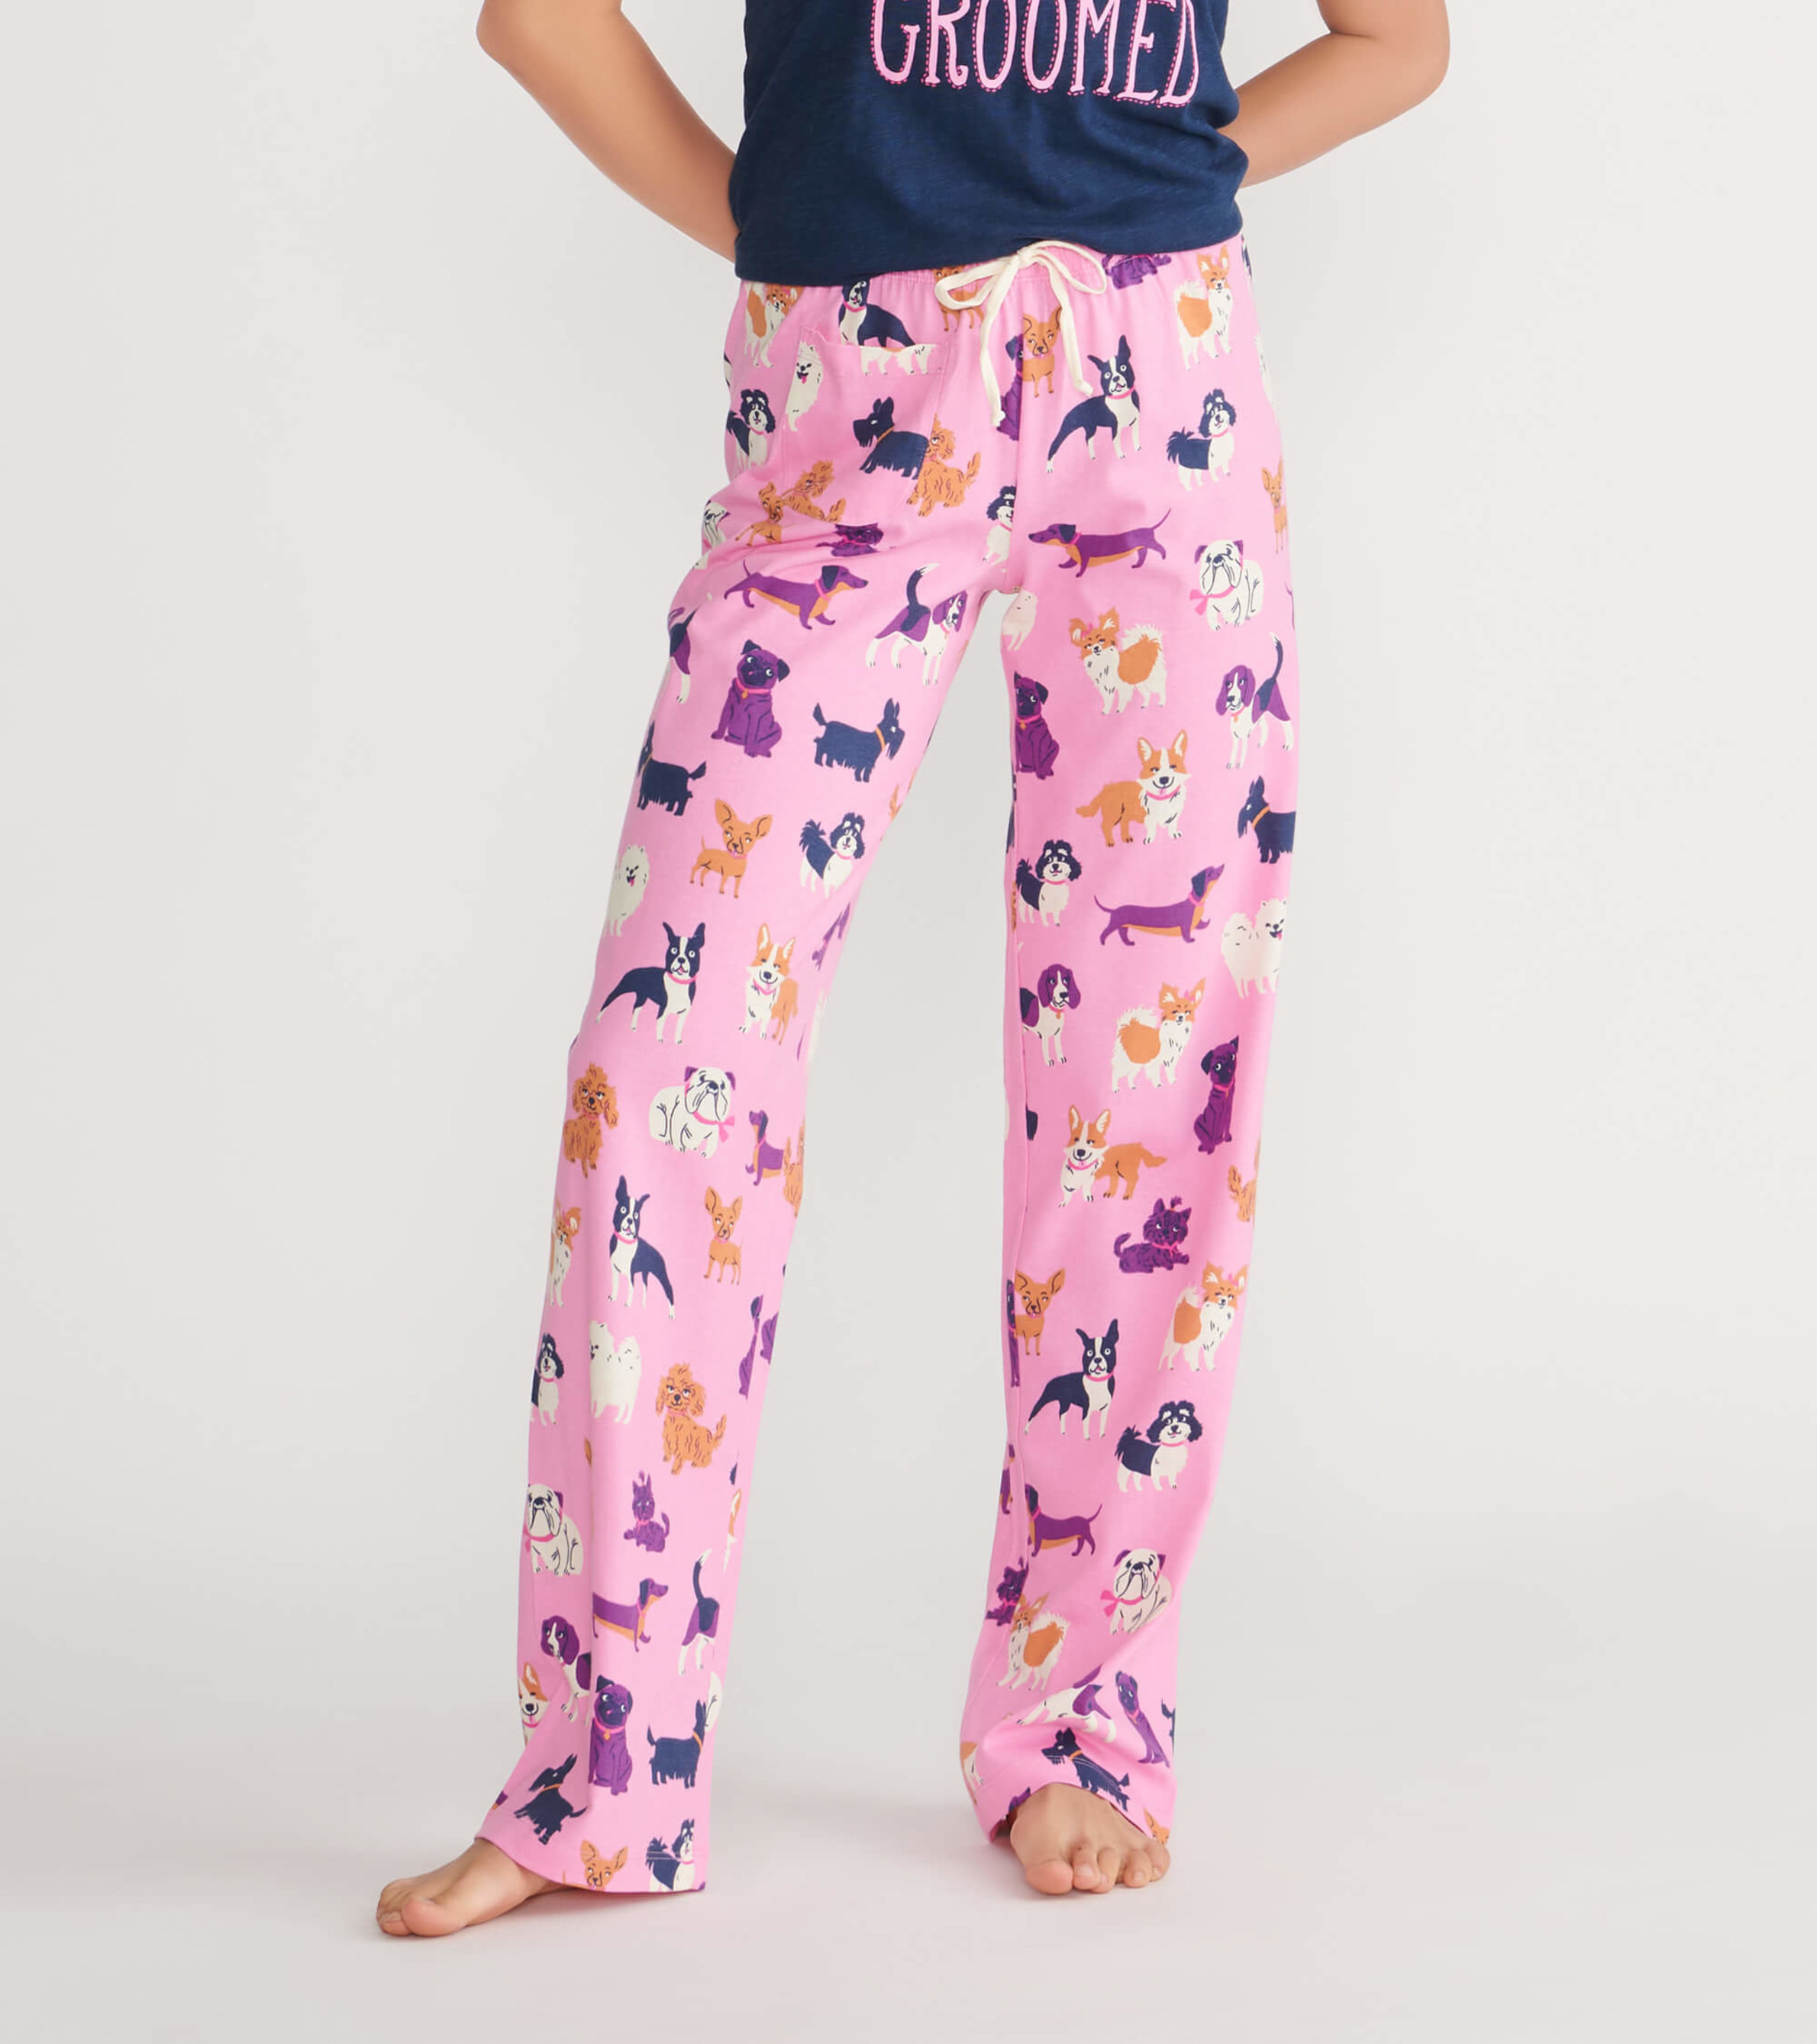 Women's Heart of Dogs Pattern Snuggle Up Sleep Pant